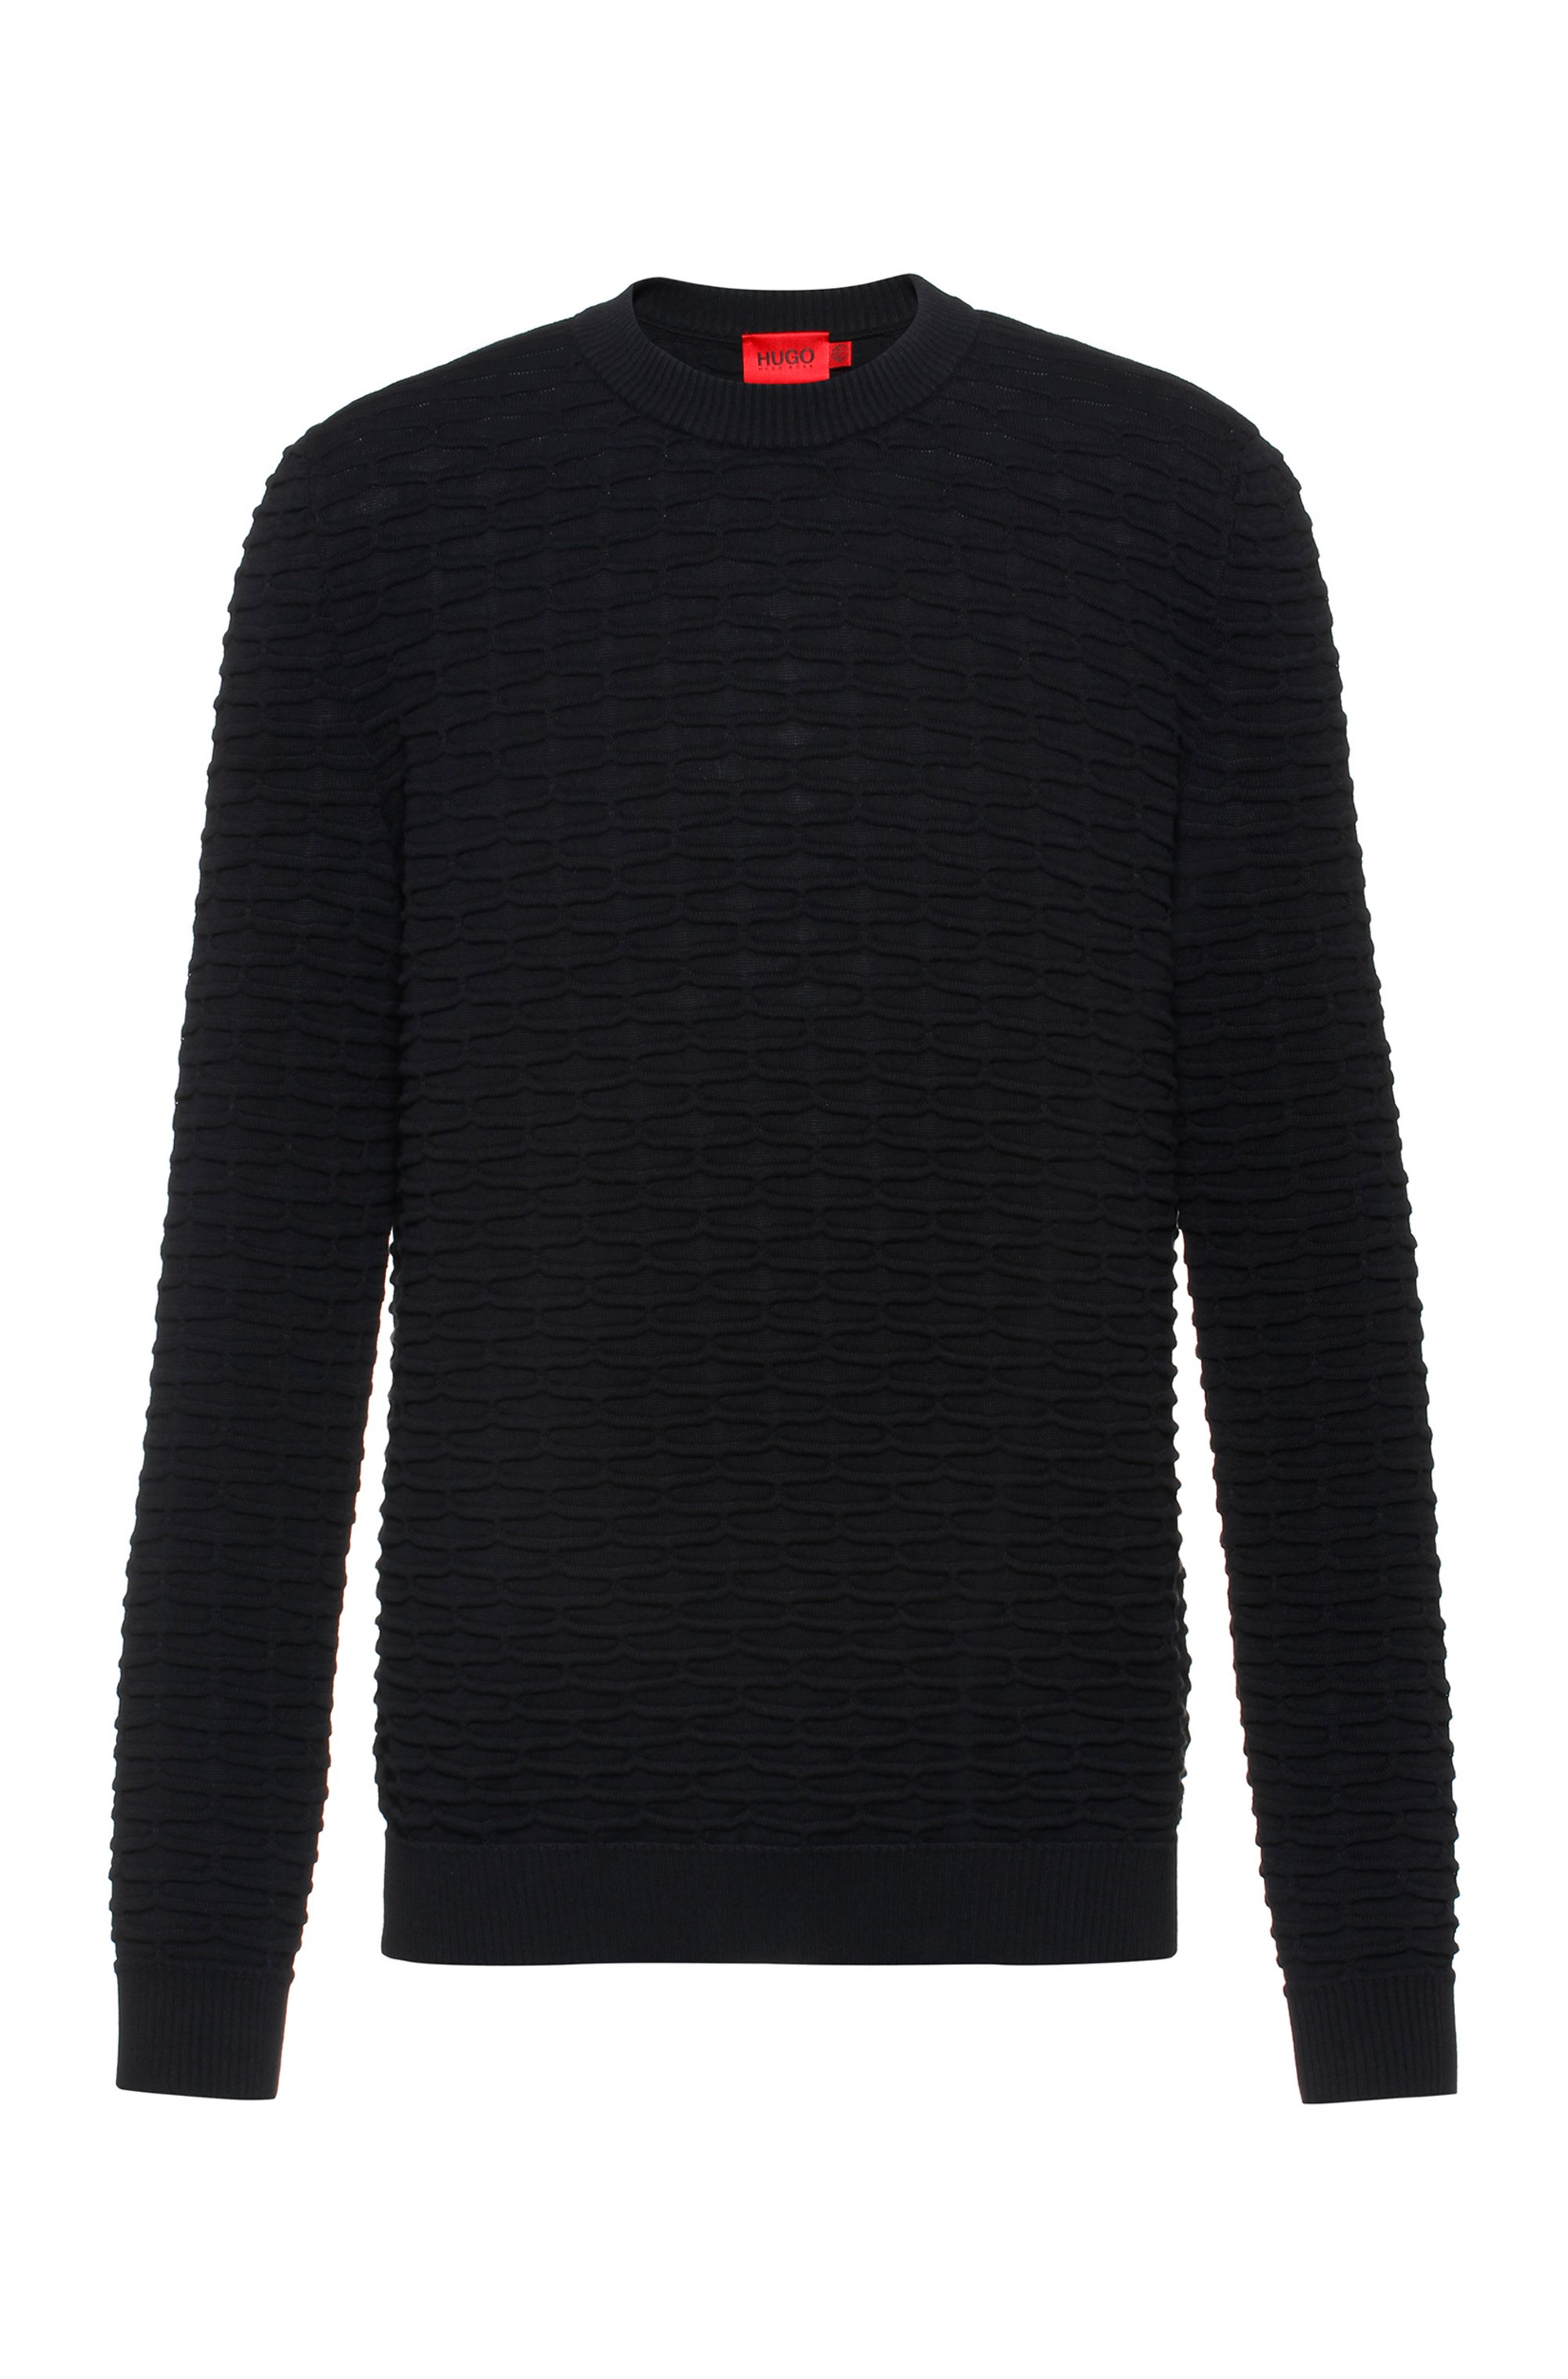 Relaxed-fit sweater in patterned organic cotton, Black